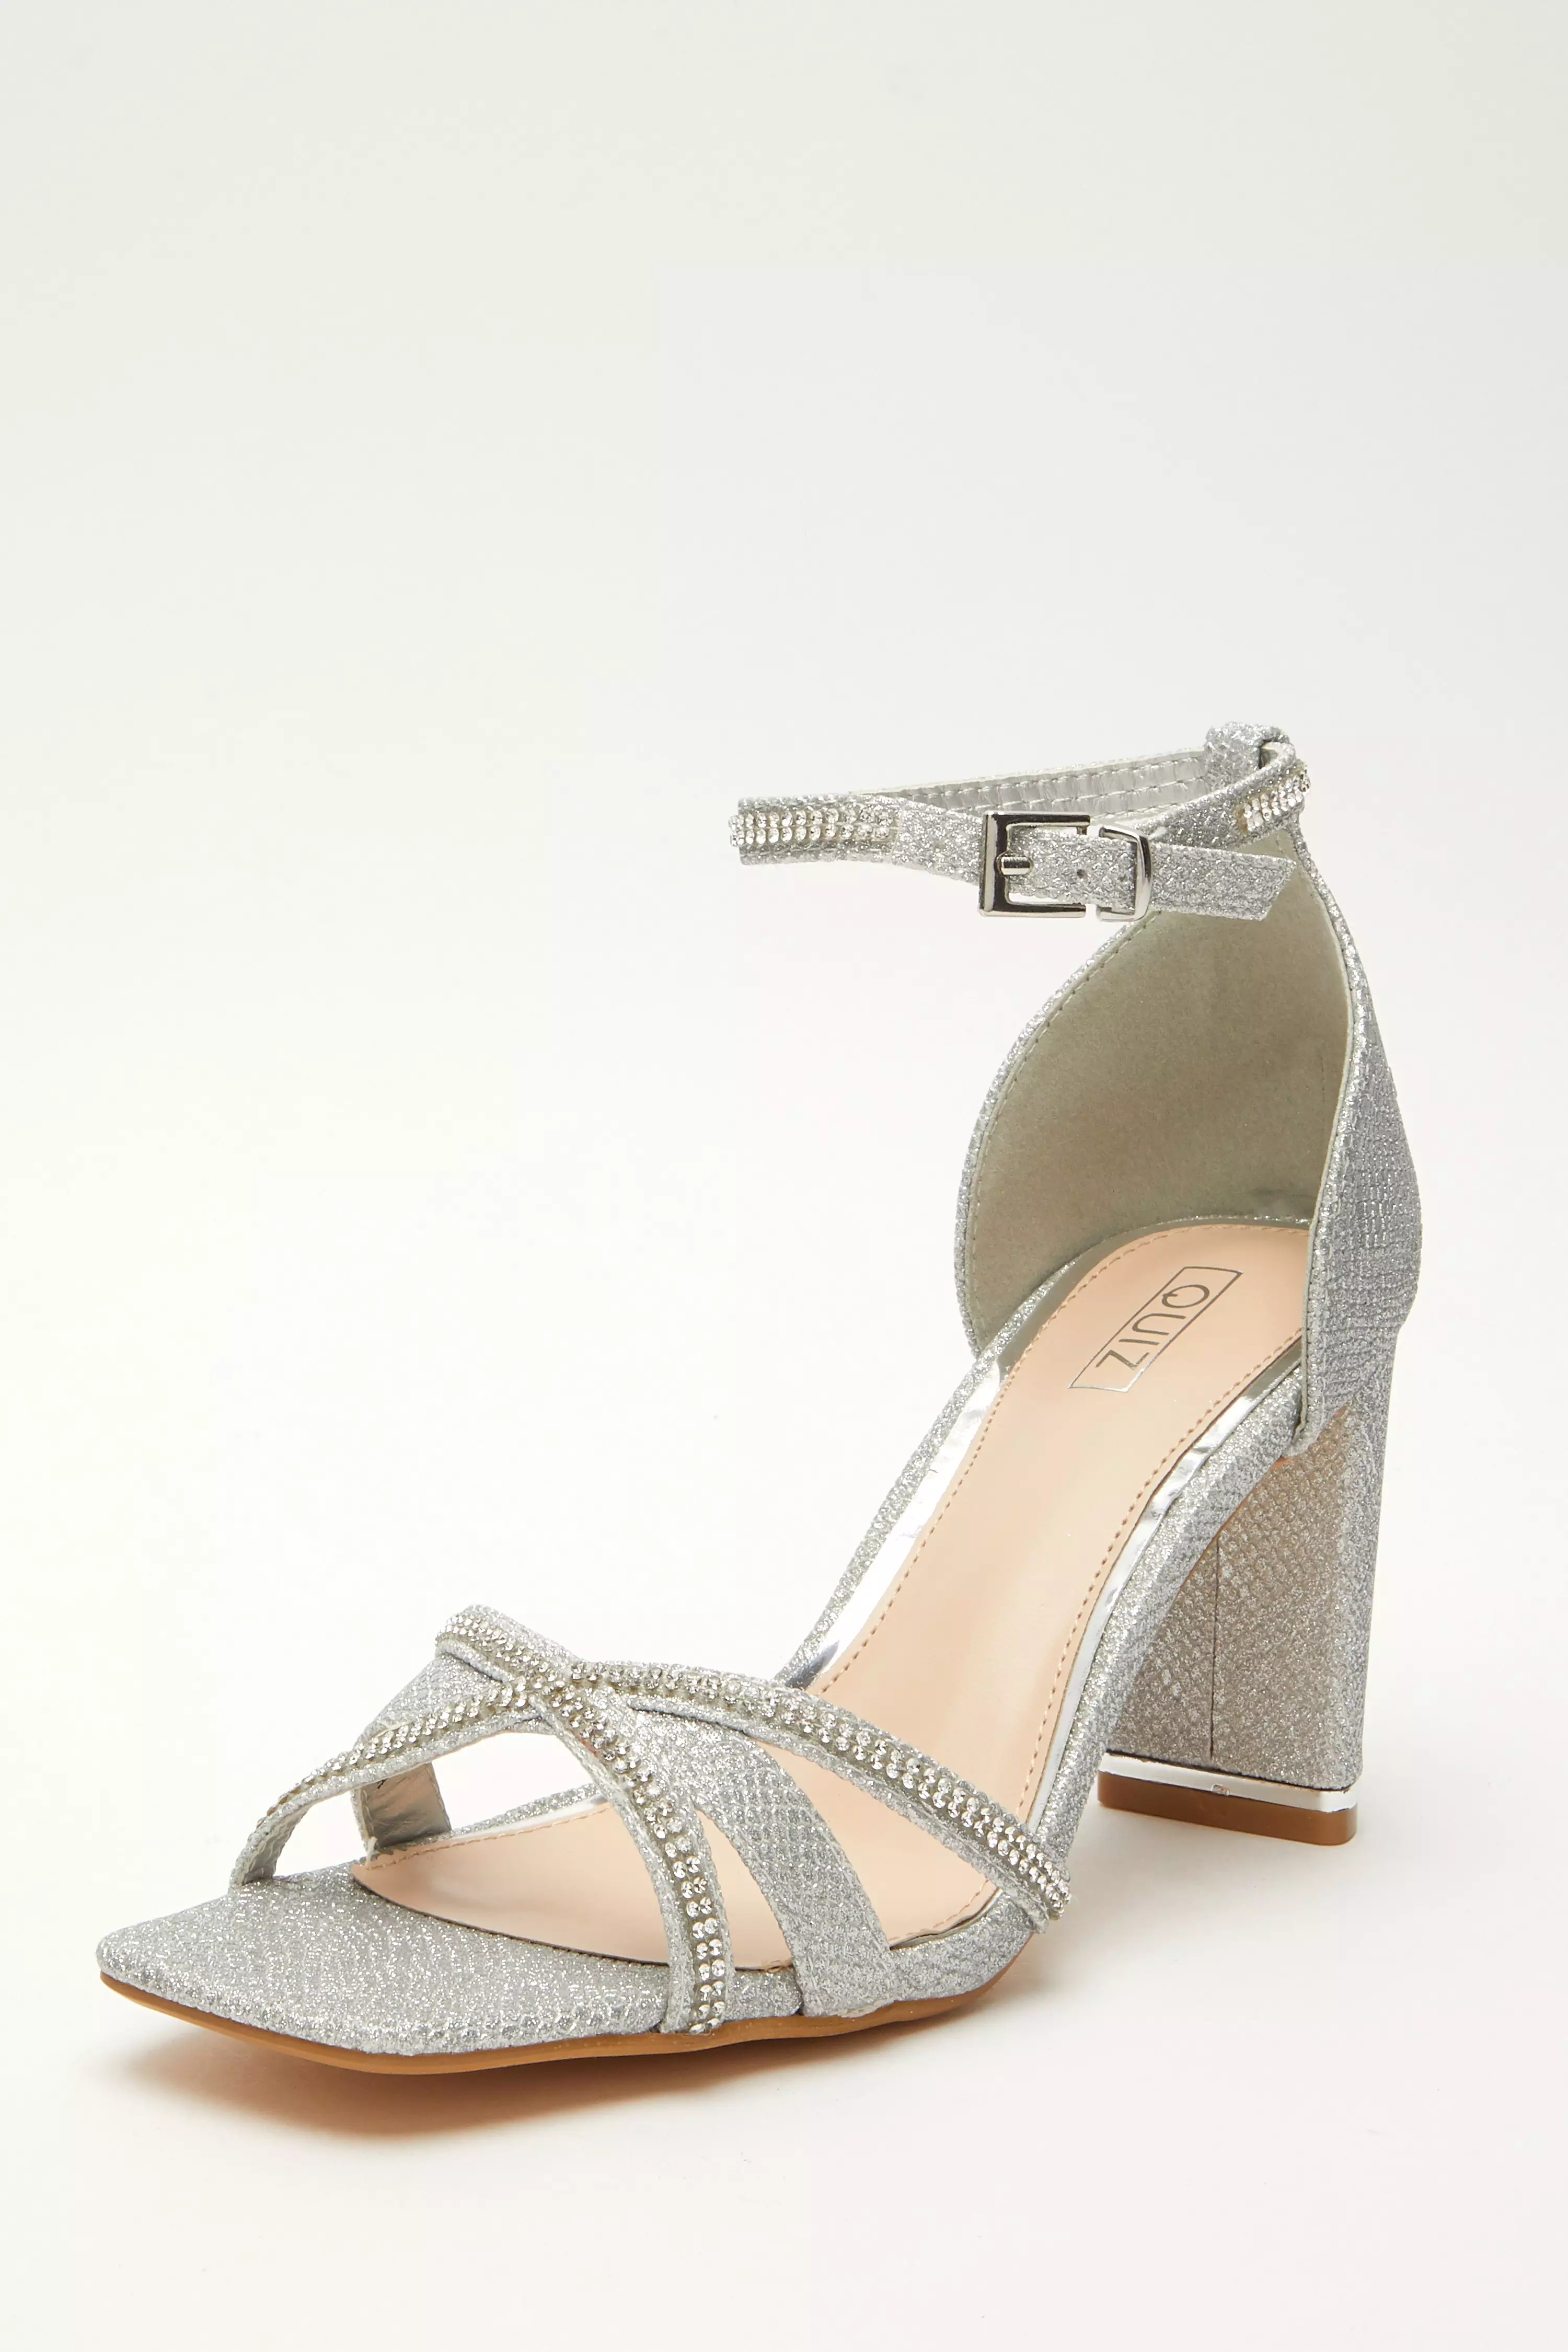 Silver Shimmer Cross Strap Heeled Sandals - QUIZ Clothing